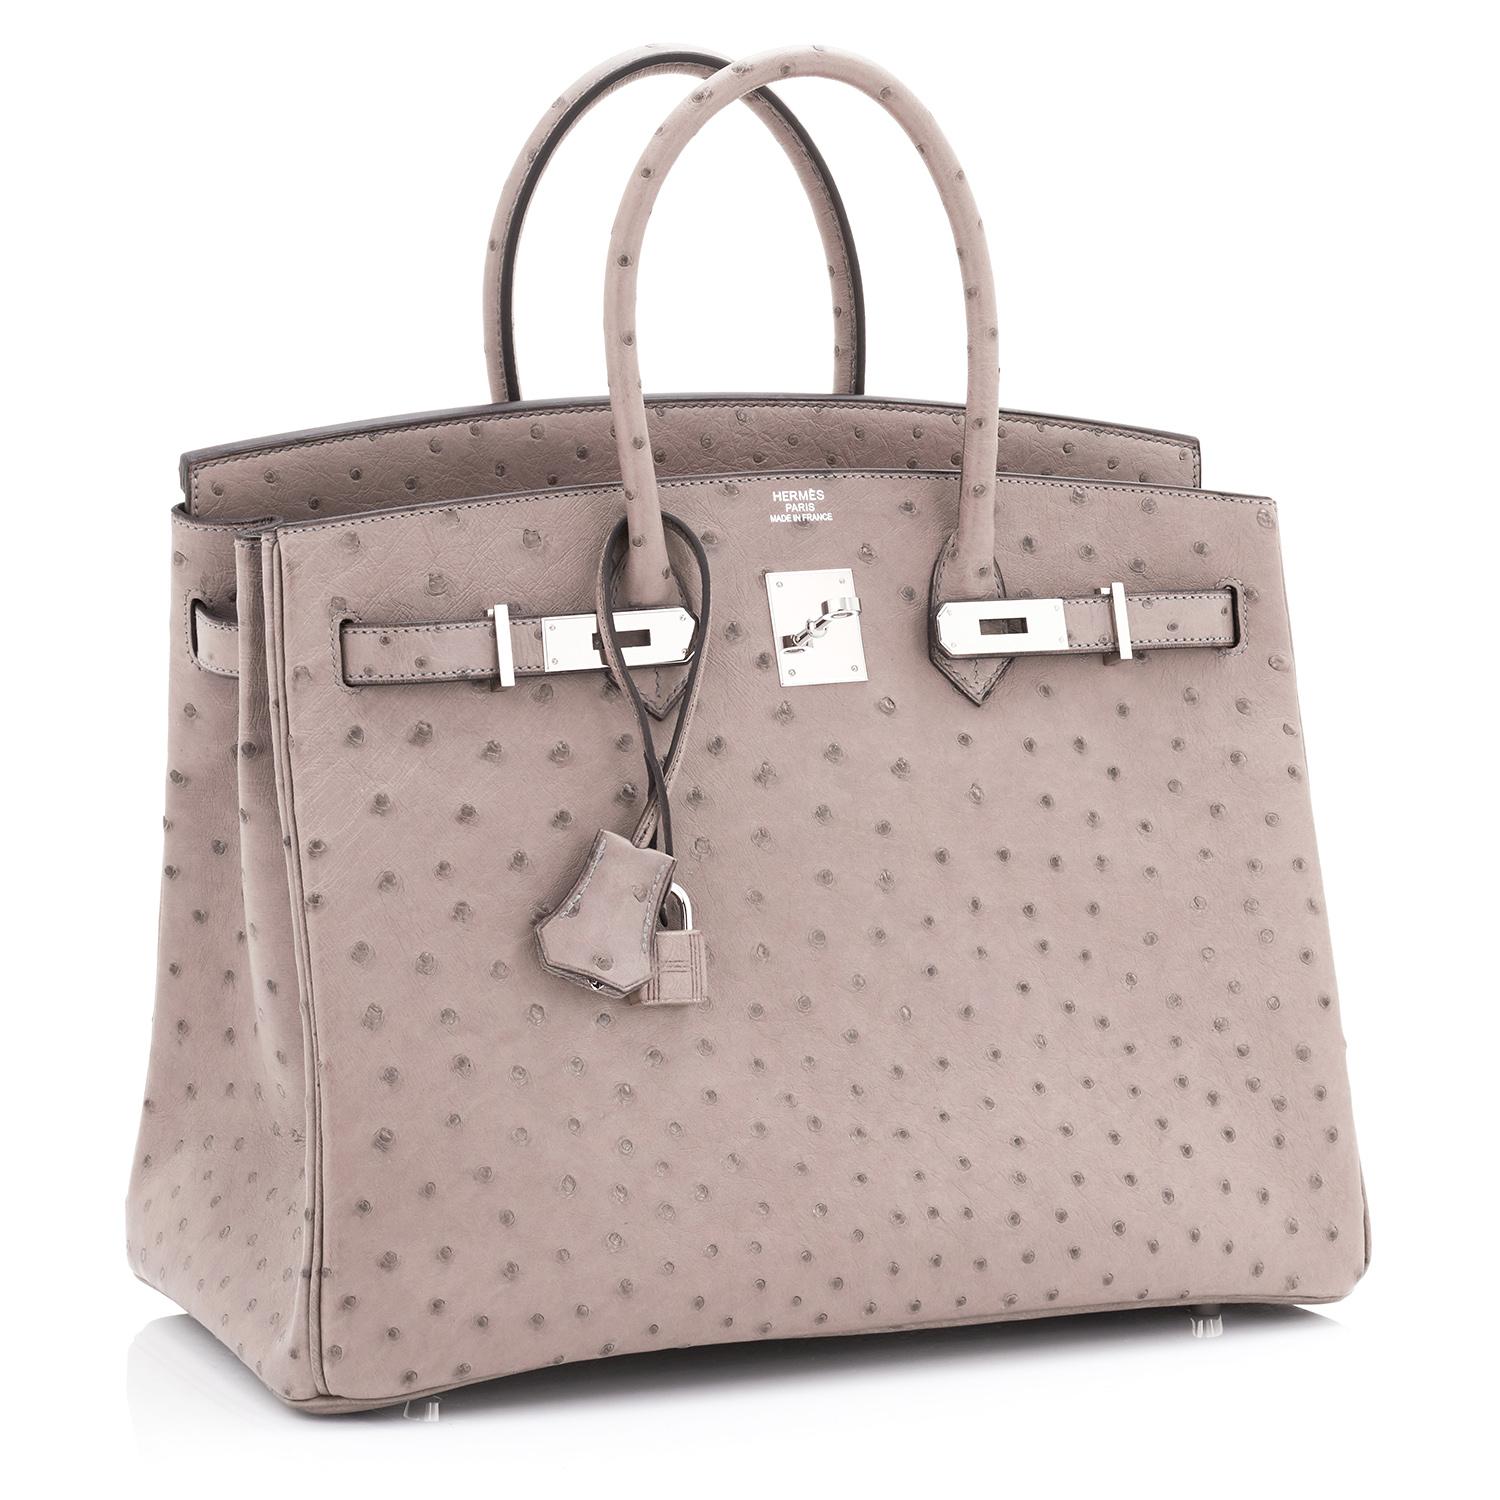 Hermes Birkin 35cm Gris Tourterelle Ostrich Palladium Bag NEW ULTRA RARE
Beyond sublime! Make a statement without saying a word!
This is the ultimate lifetime exotic Birkin for the chic and elegant fashionista!
New or Never Worn. Pristine Condition